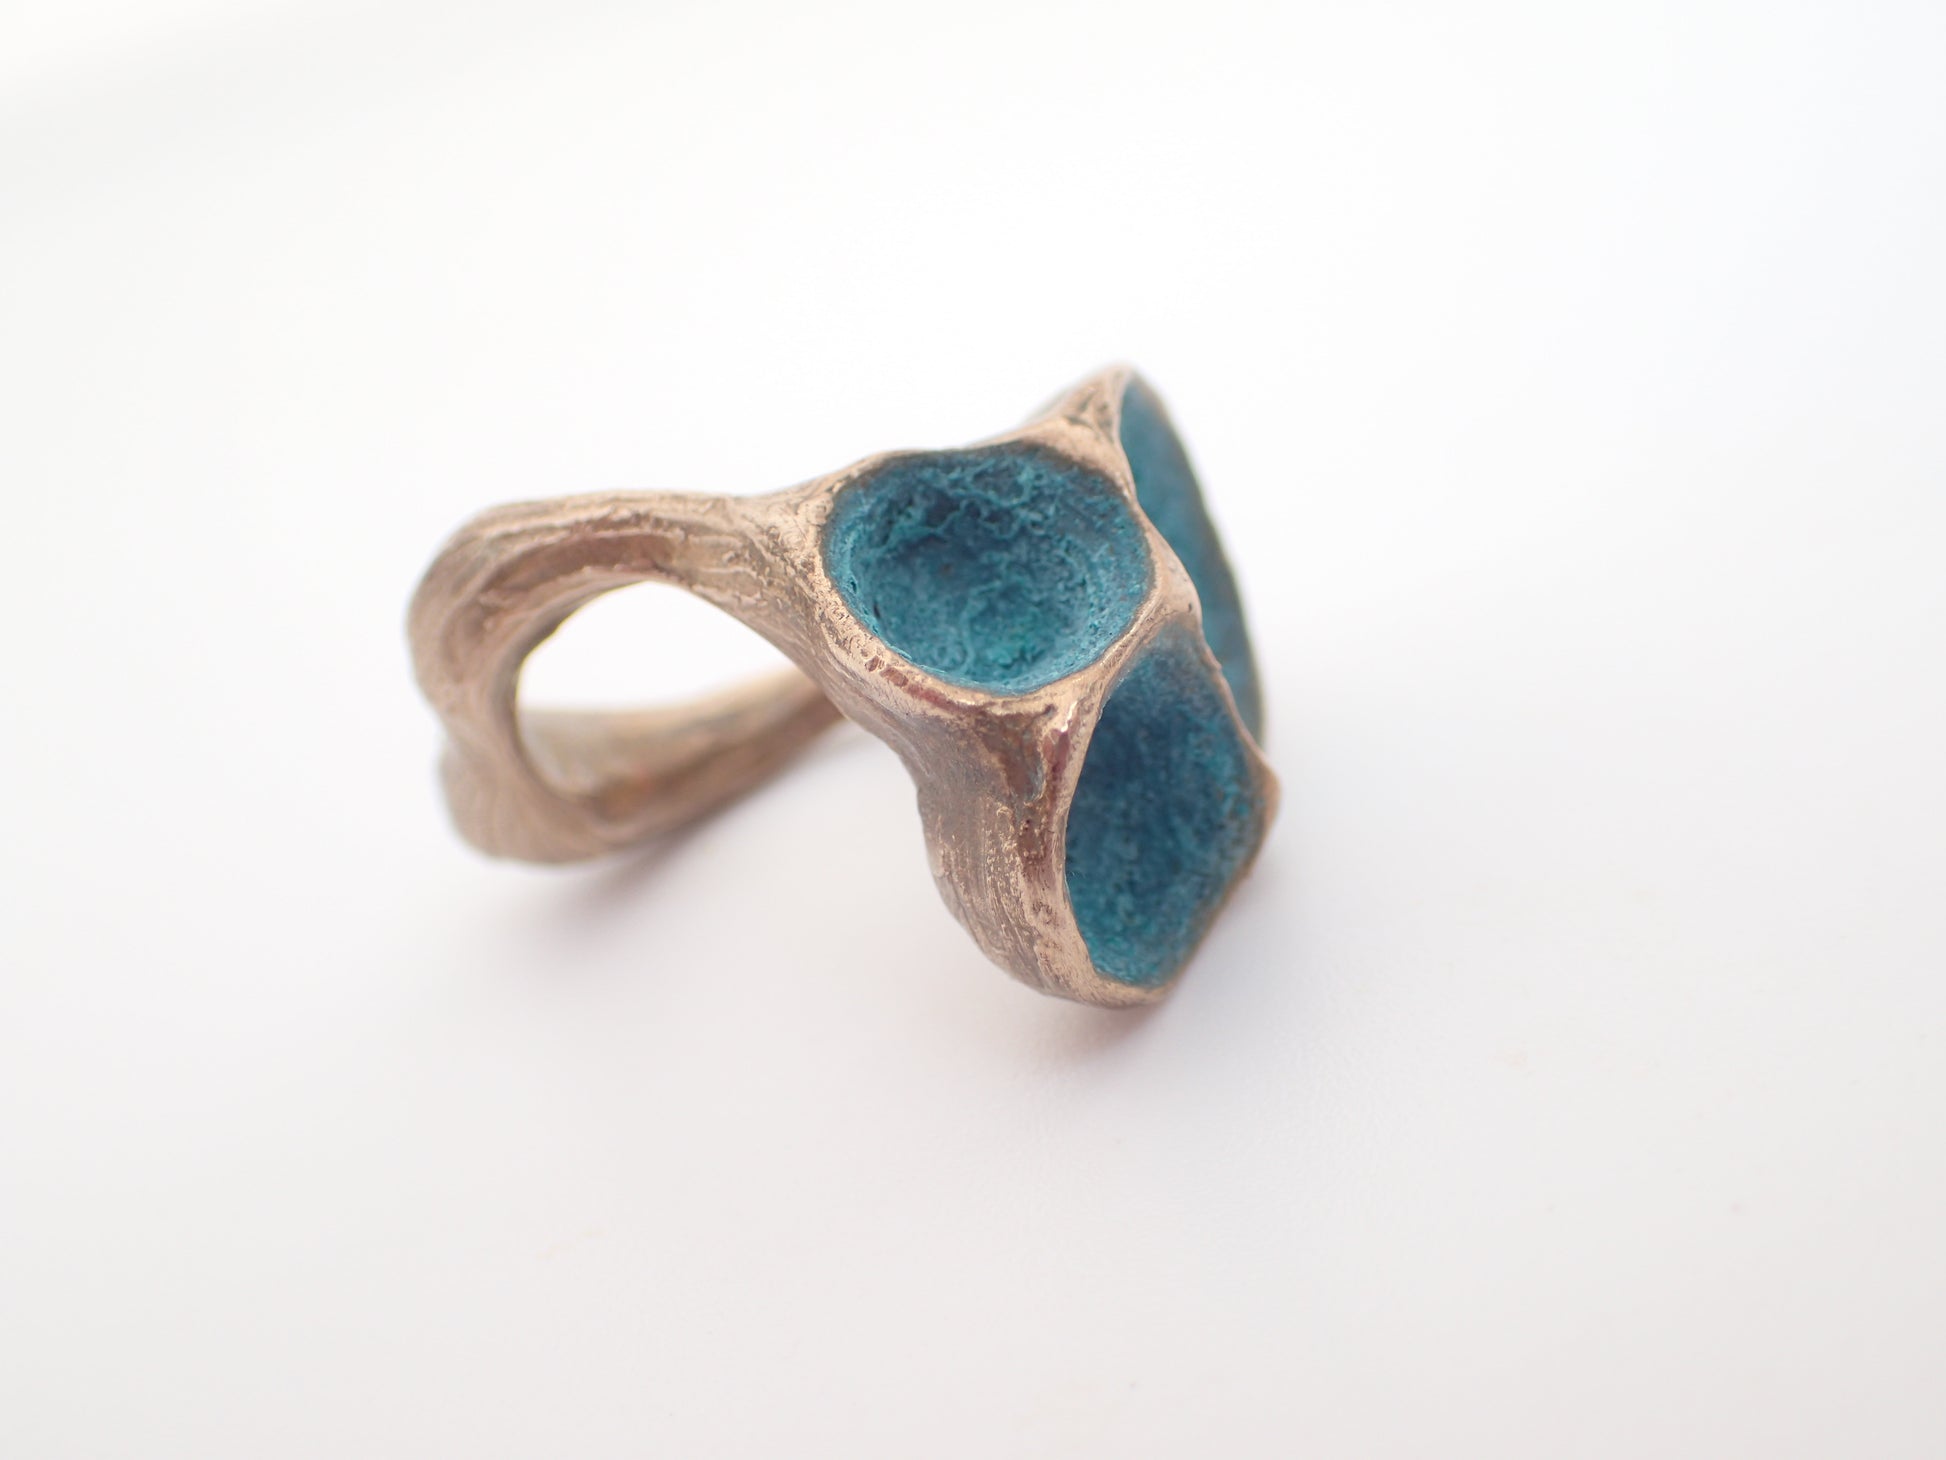 'Artefact' Statement ring Bronze with Turquoise patina.-Beca Beeby